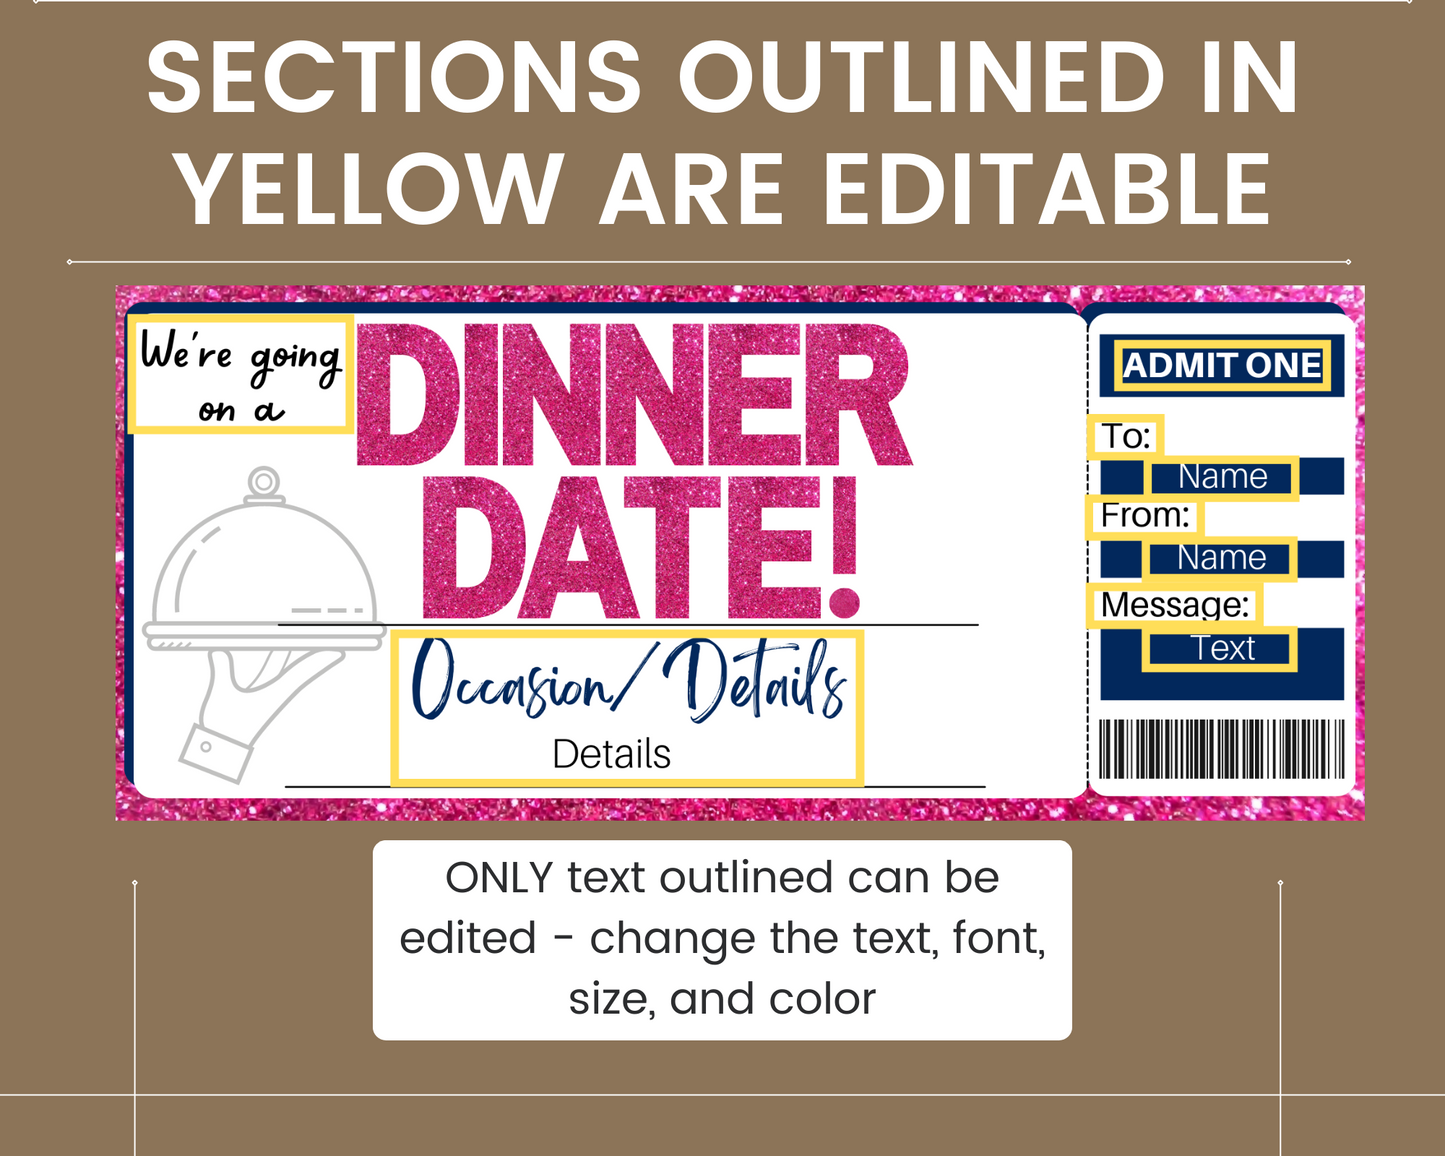 Printable Dinner Date Gift Ticket Template